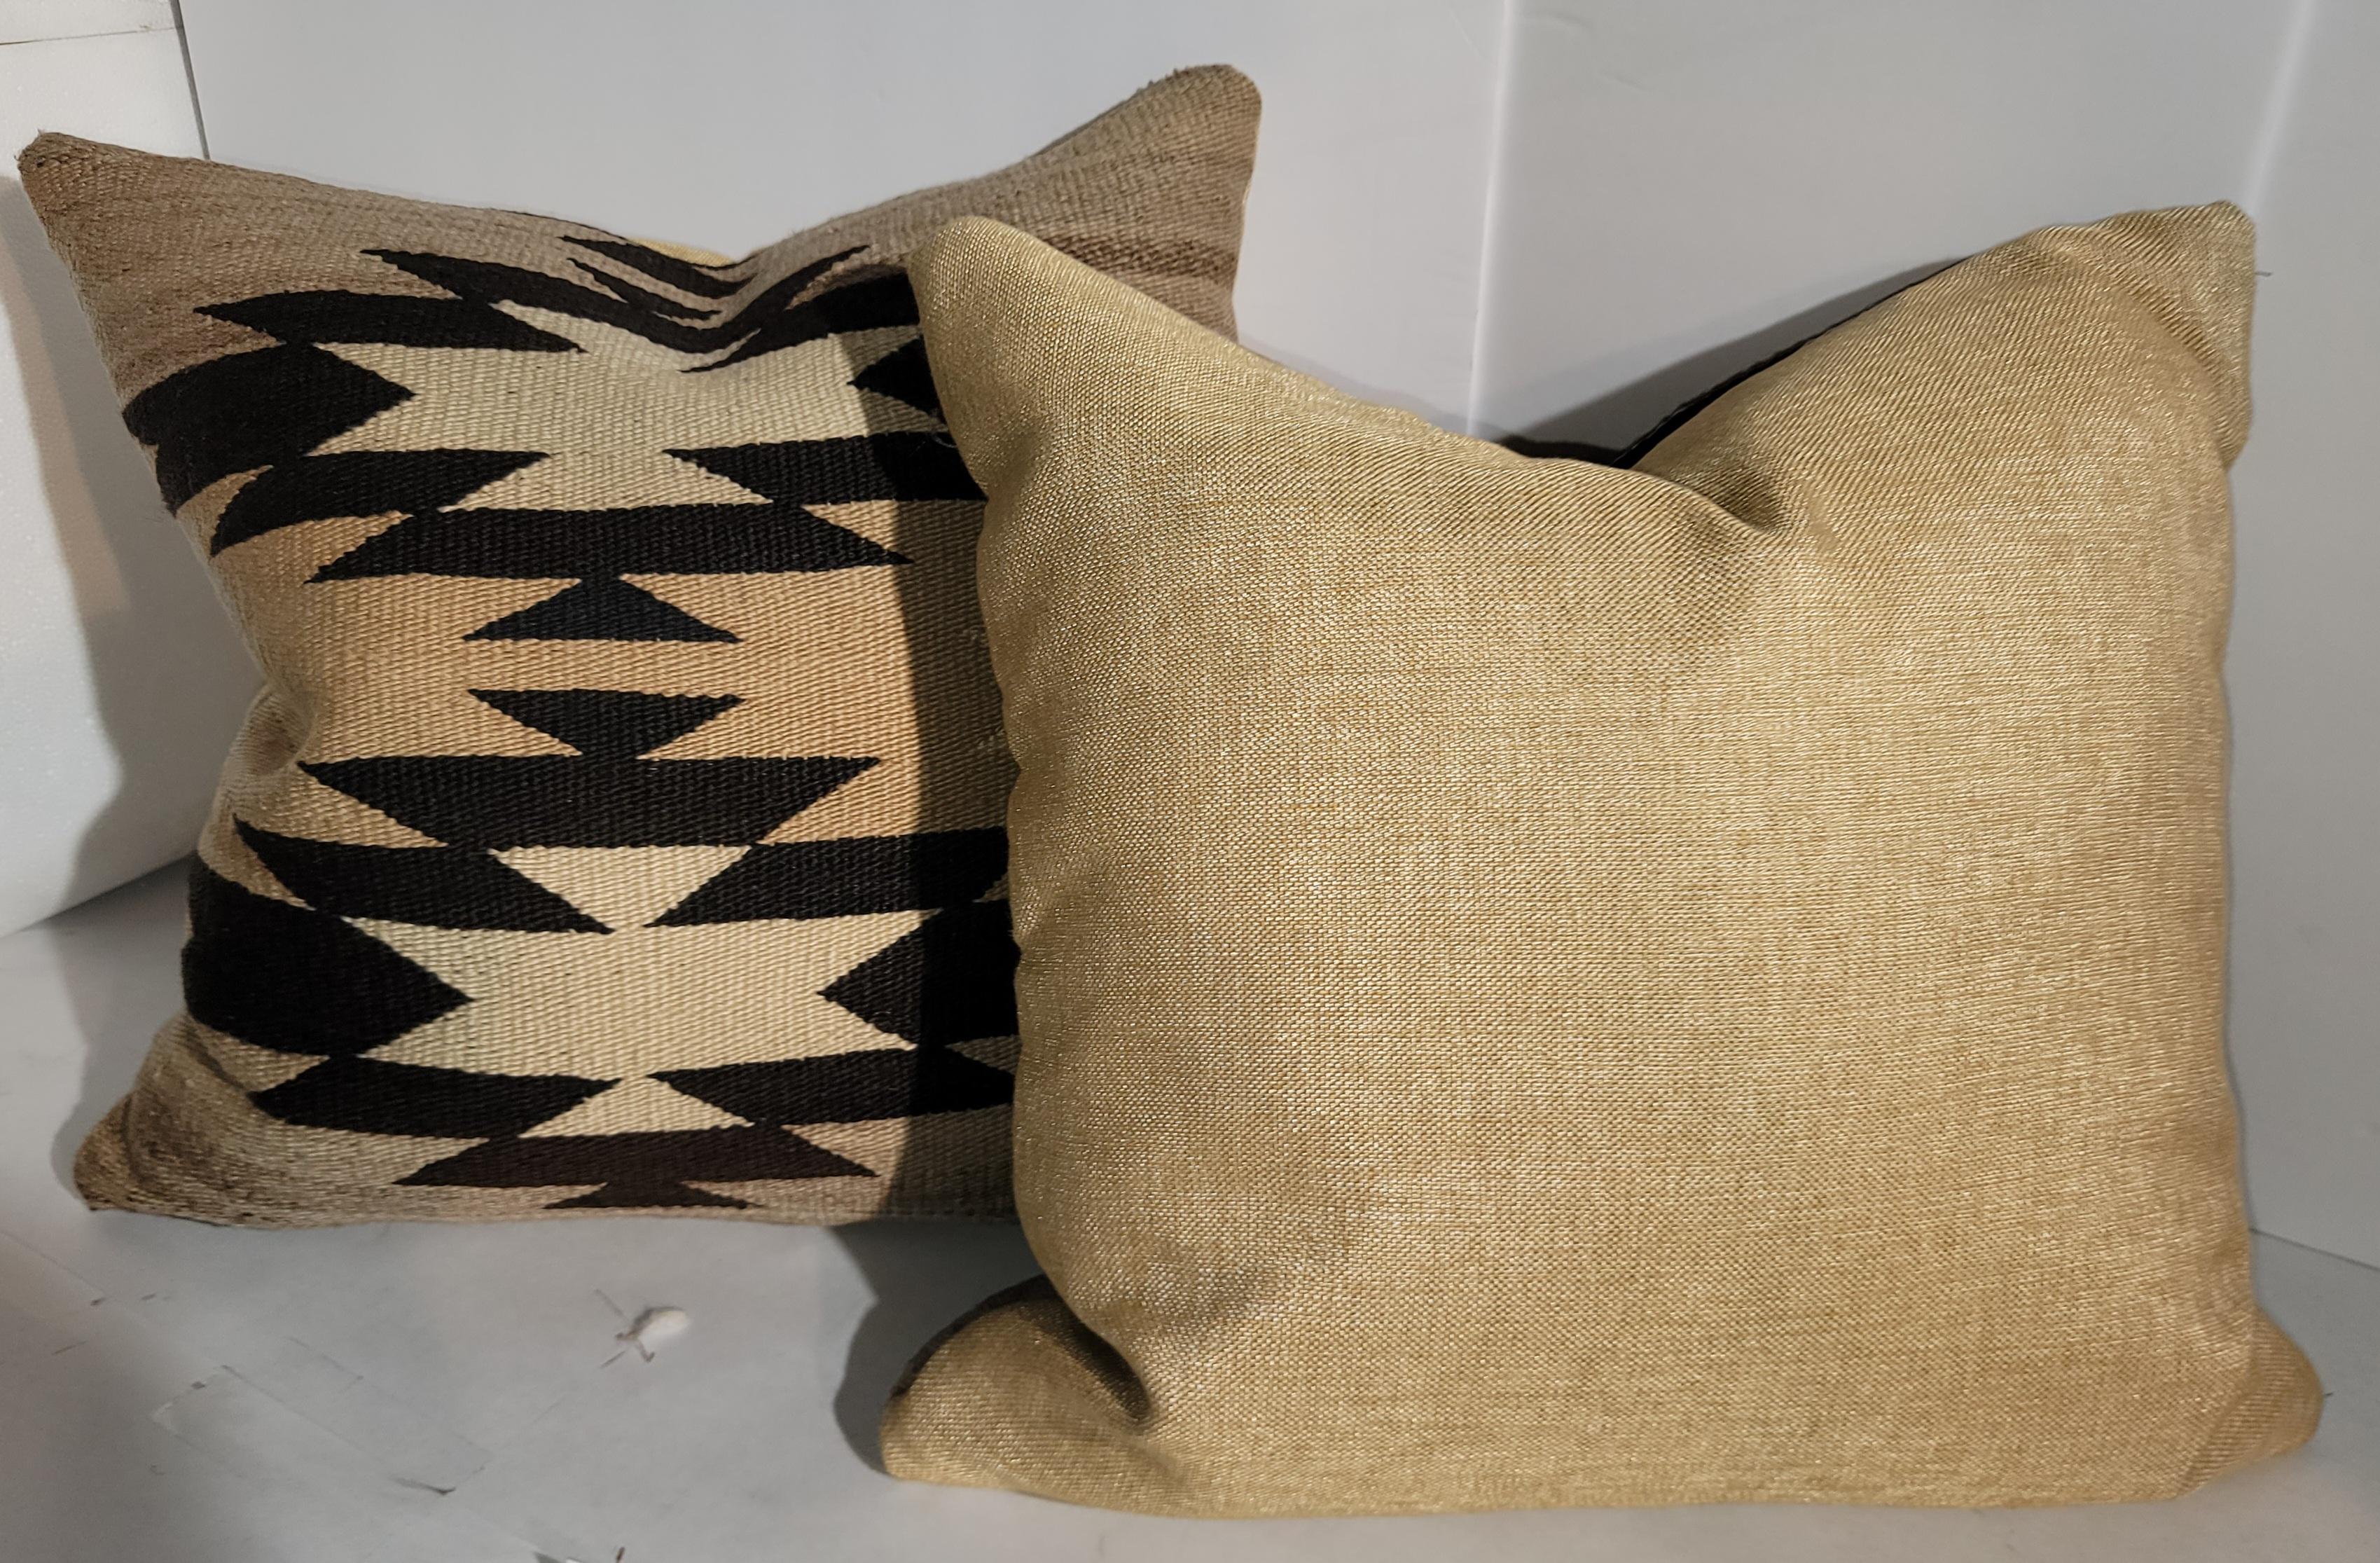 Hand-Crafted Navajo Indian Weaving Pillows, Collection of Three Pillows For Sale